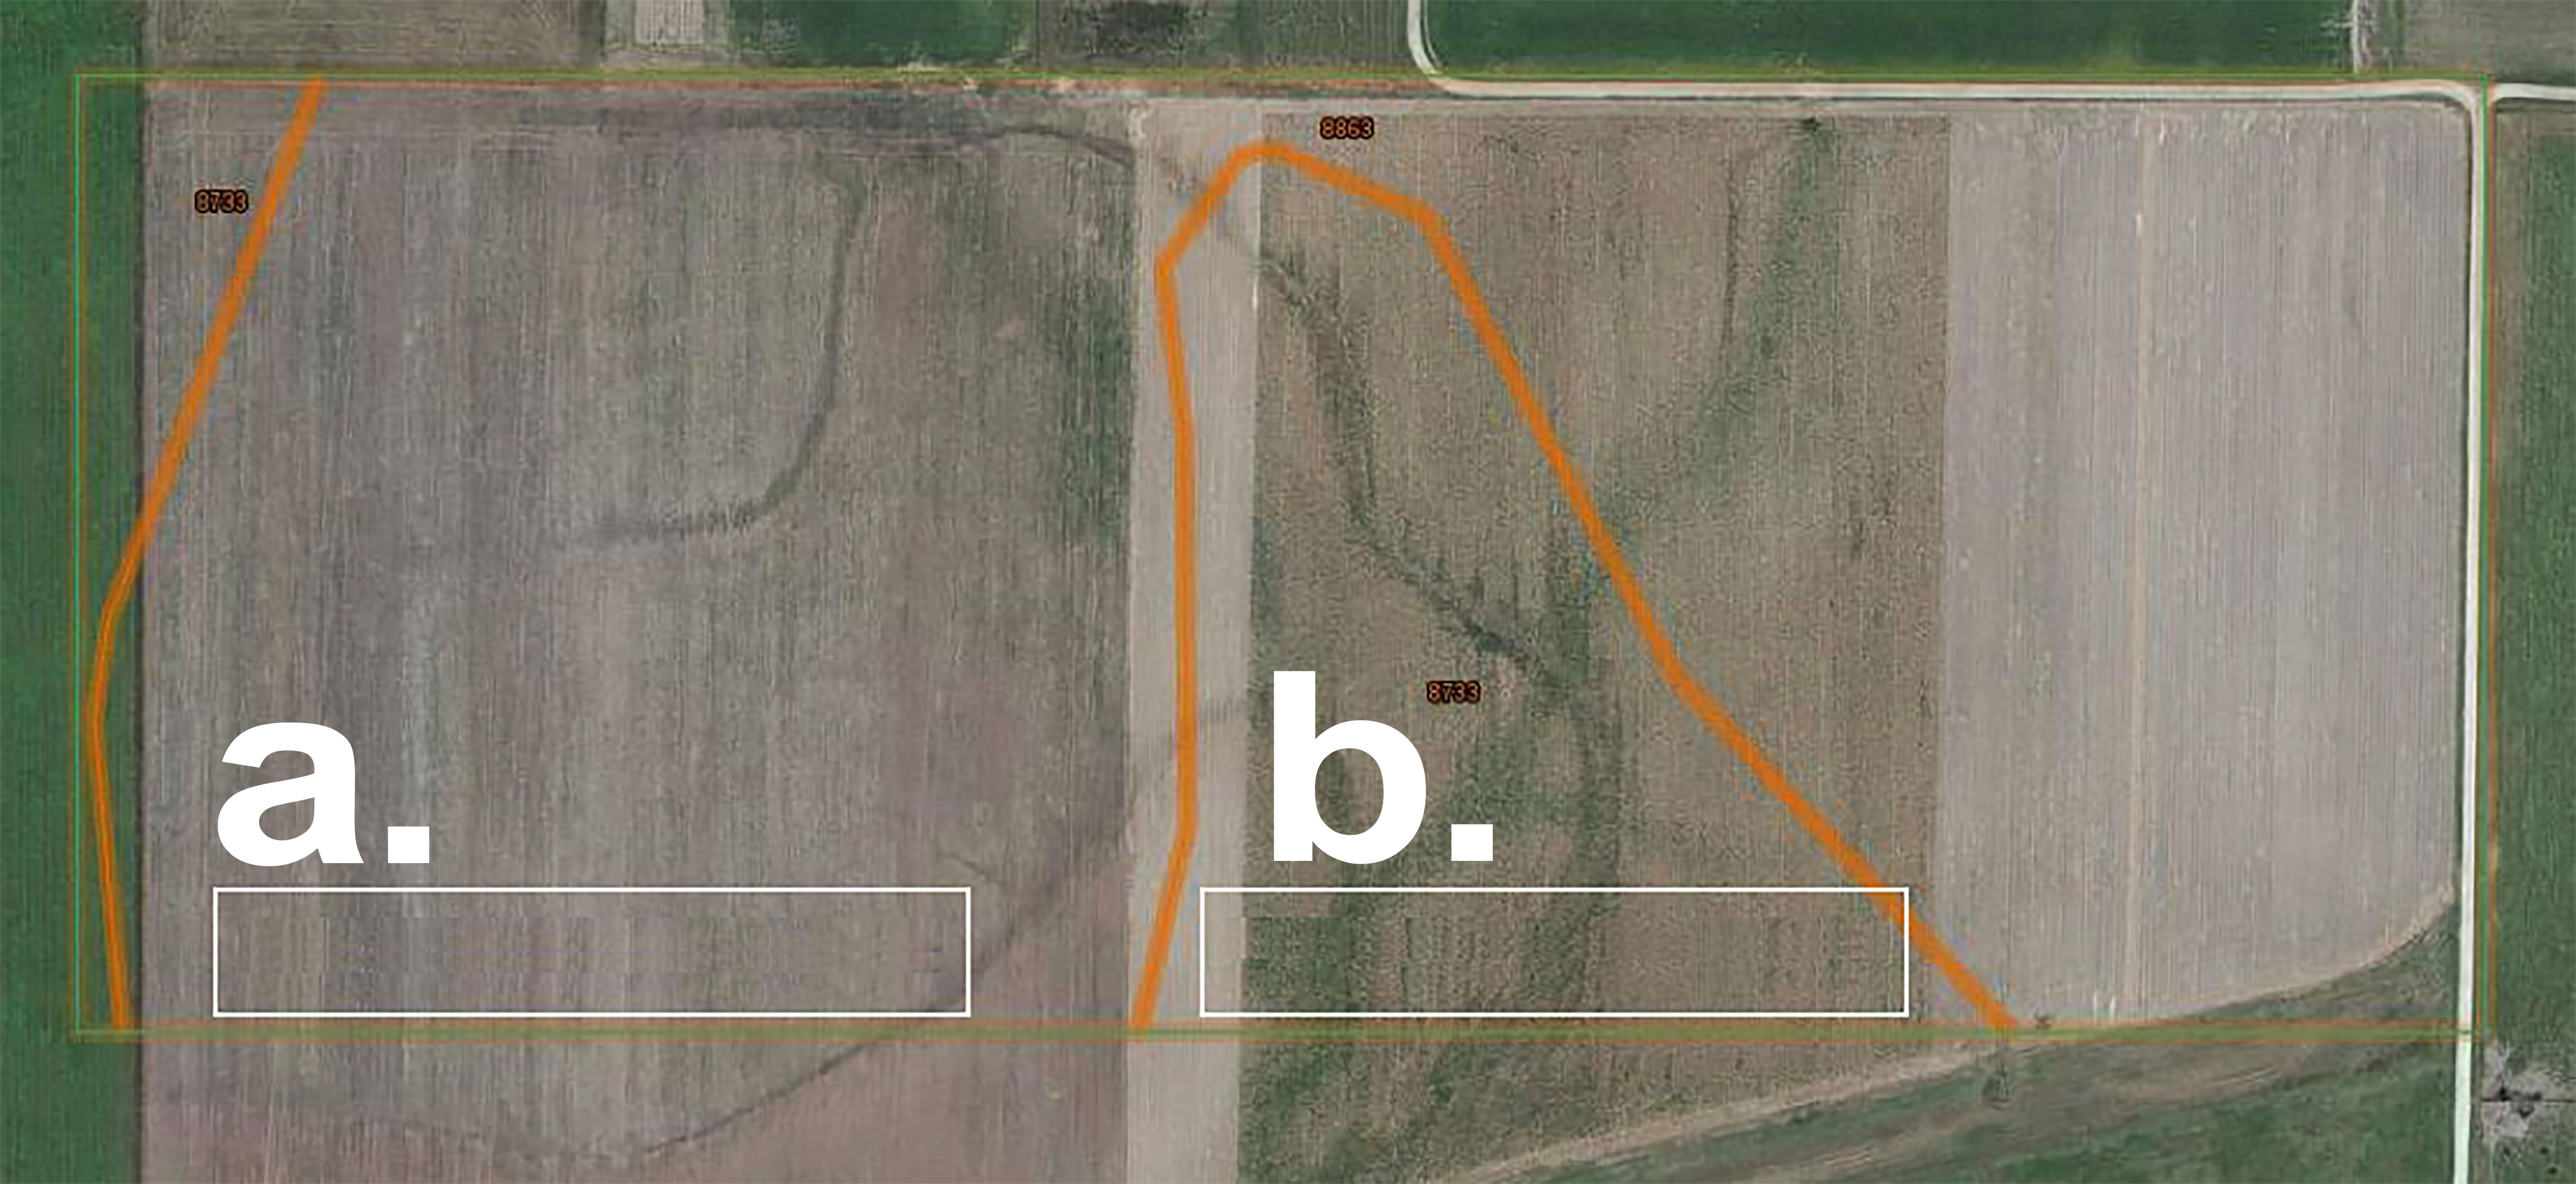 two side-by-side fields. The left is labeled &quot;a&quot;. It has uniform rows and soil. The right is labeled &quot;b&quot;. It has ununiform rows and varying soil quality.